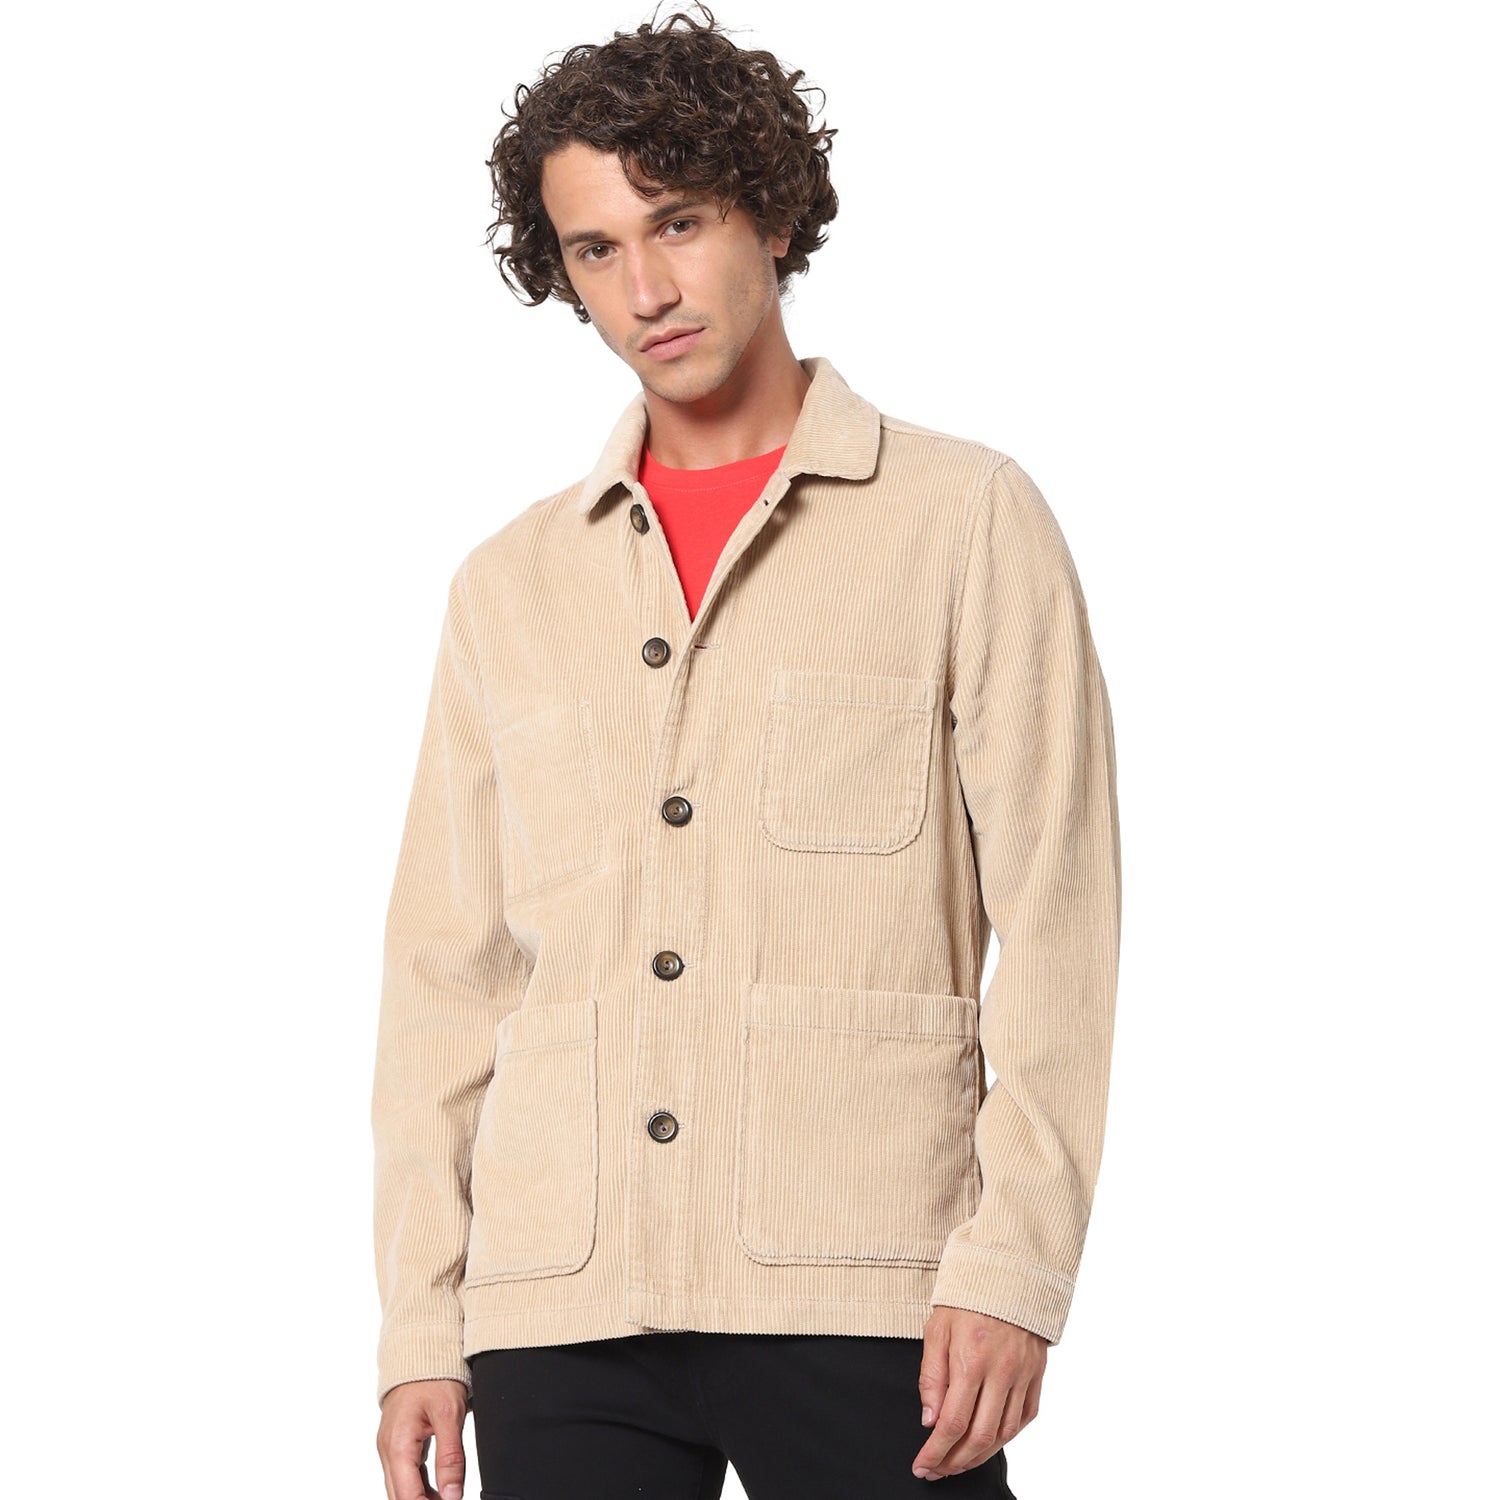 Beige Solid Cotton Long Sleeves Tailored Jacket (VUMUSEVEL)